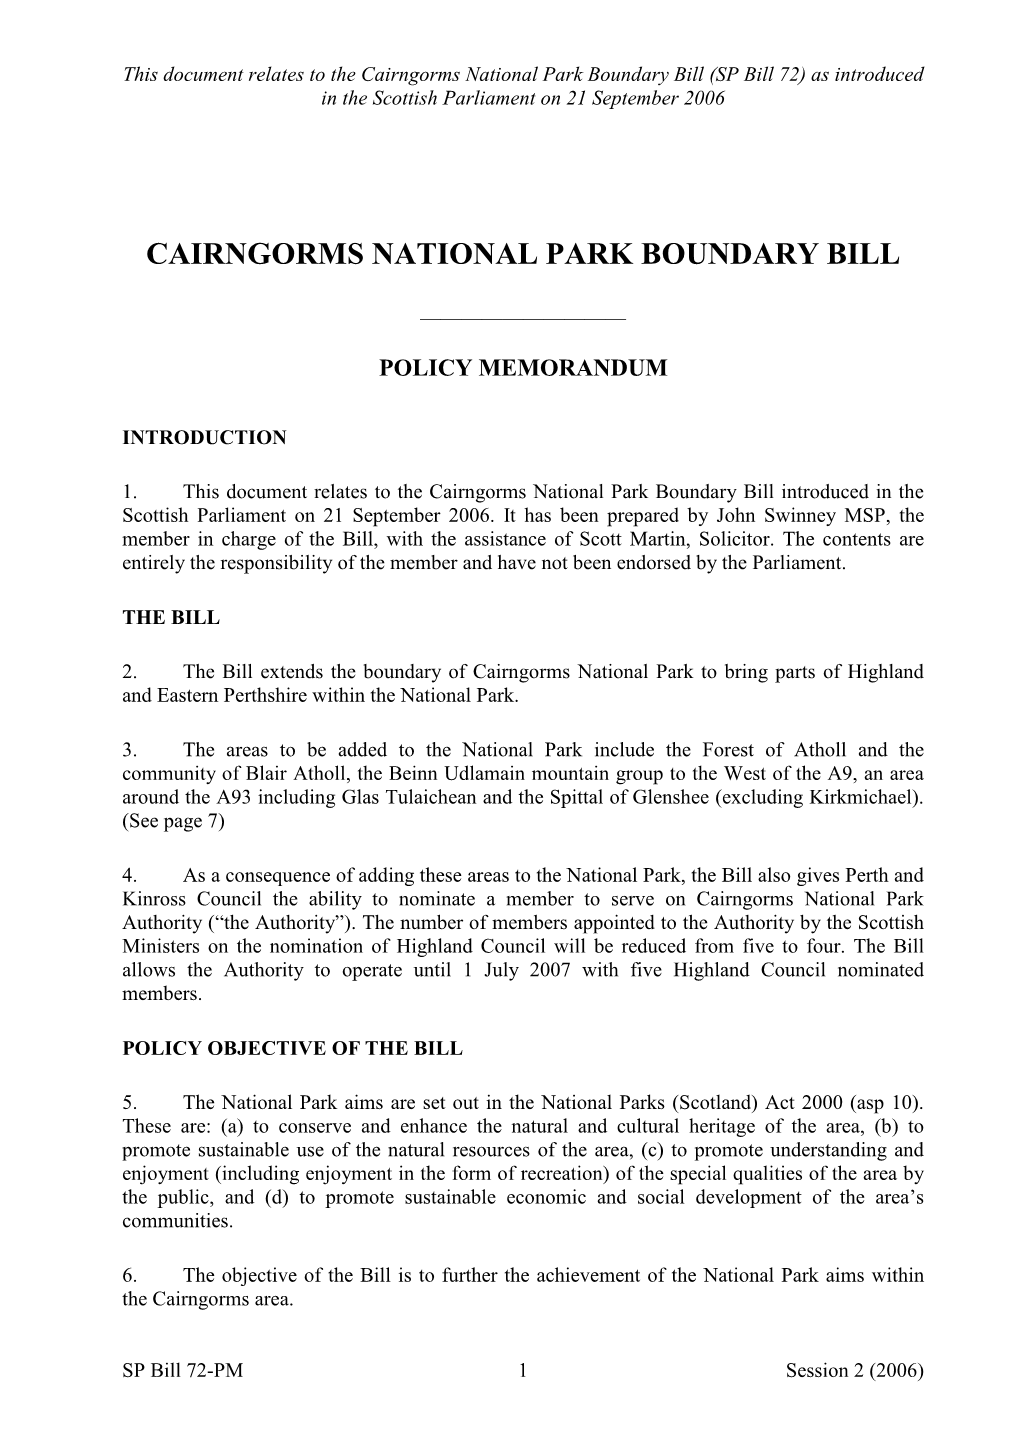 Cairngorms National Park Boundary Bill (SP Bill 72 ) As Introduced in the Scottish Parliament on 21 September 2006